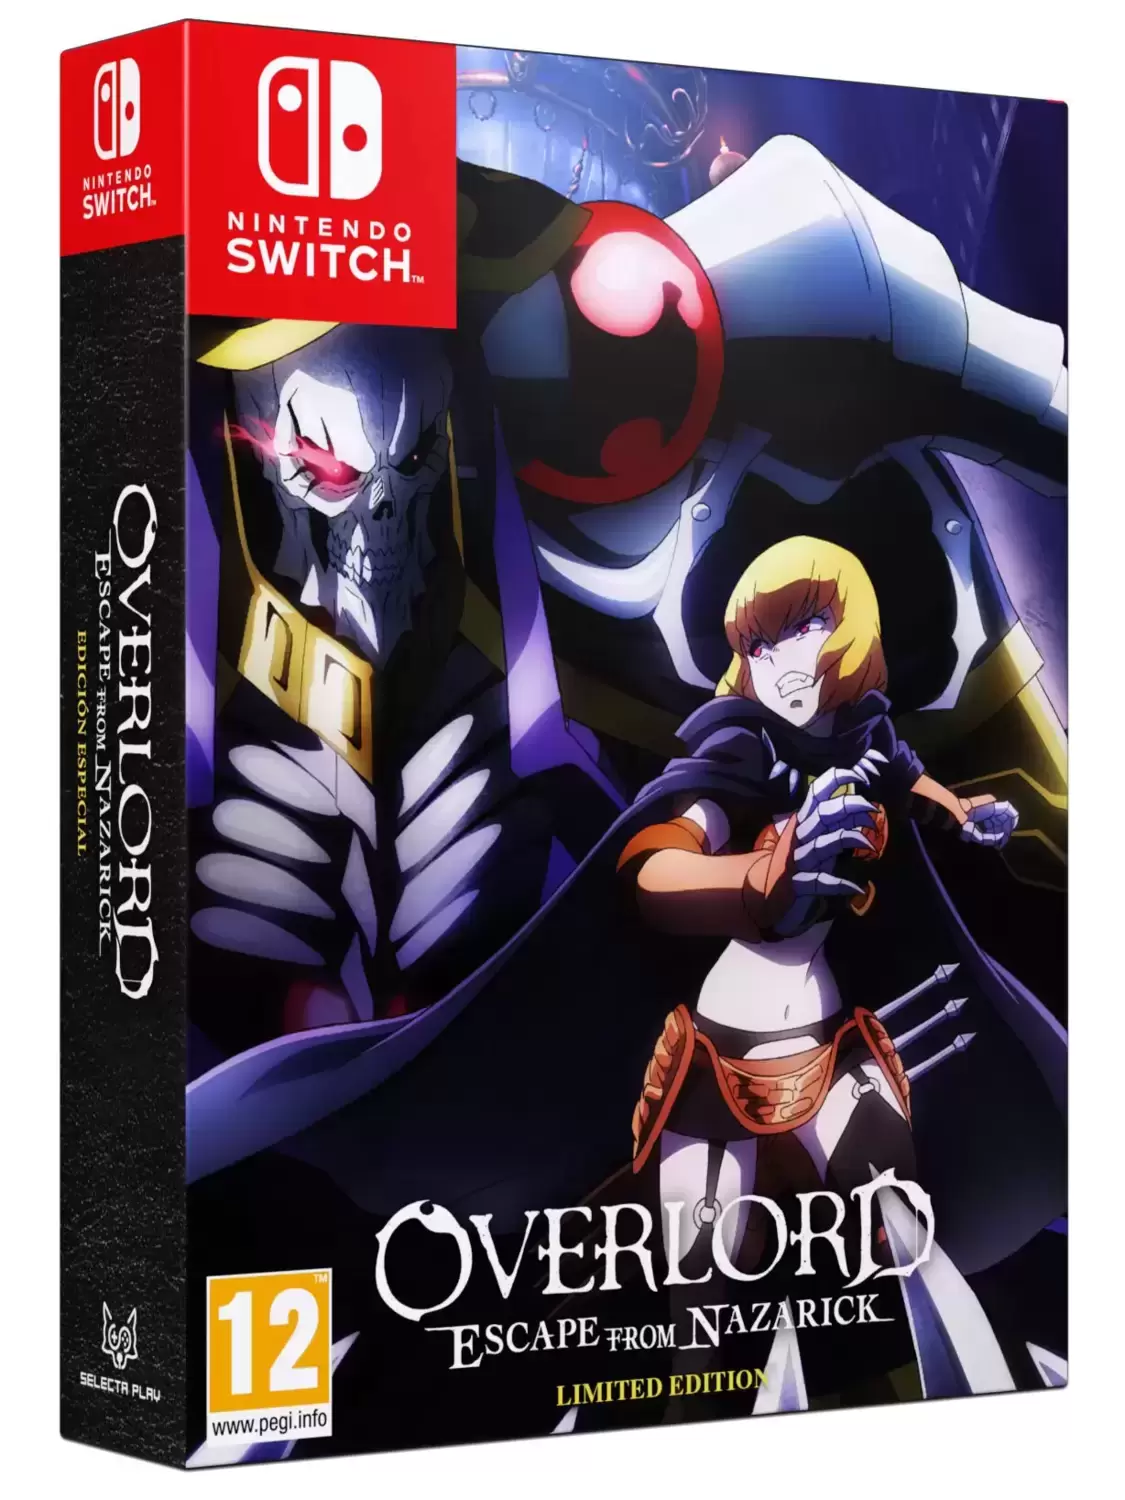 Jeux Nintendo Switch - Overlord Escape From Nazarick - Limited Edition